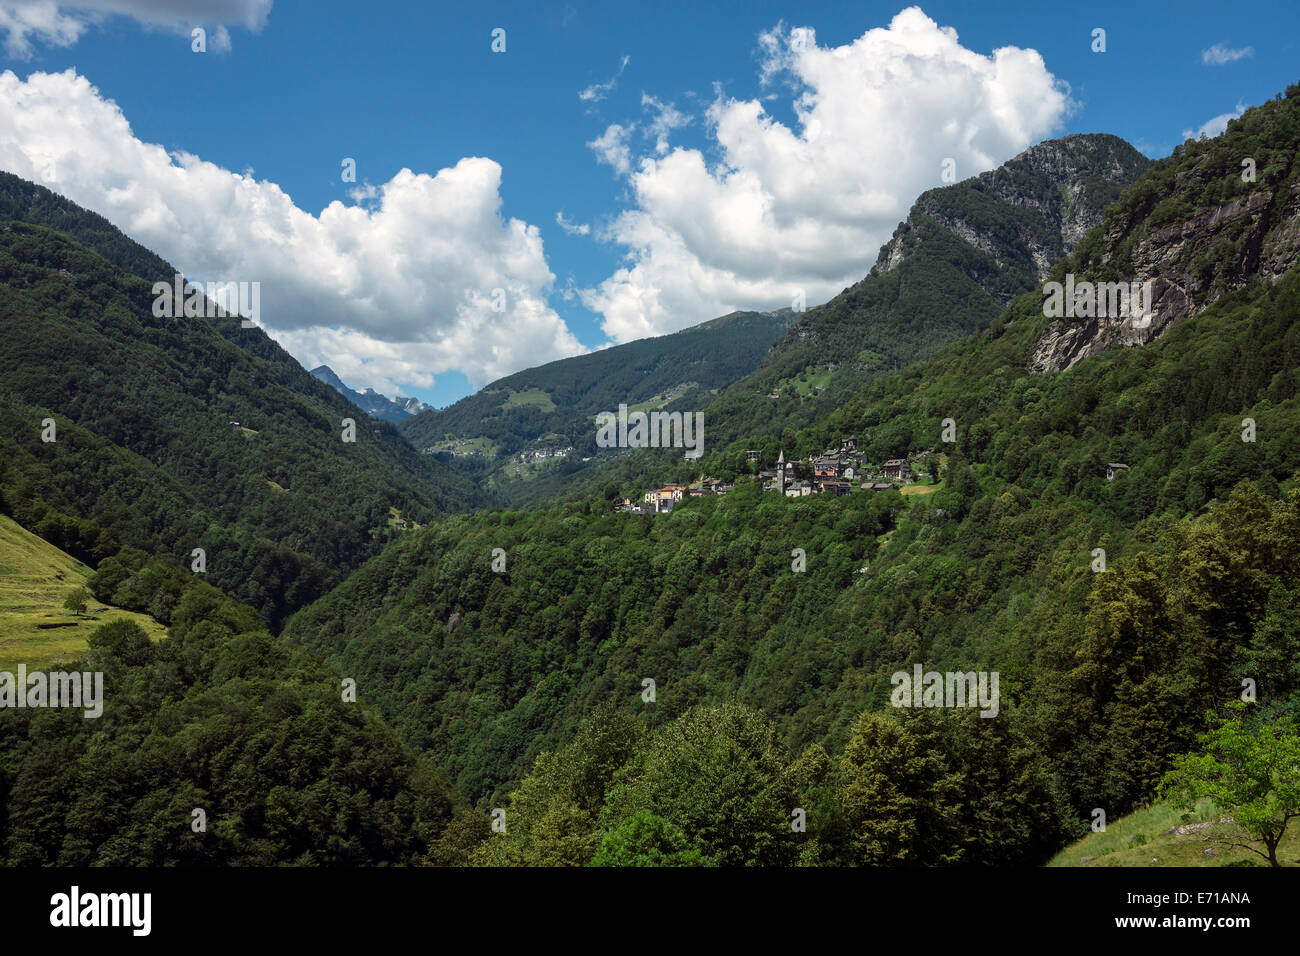 Switzerland, Ticino, View to Valle Onsernone with Isorno canyon, Mountain villages Russo and Comologno Stock Photo